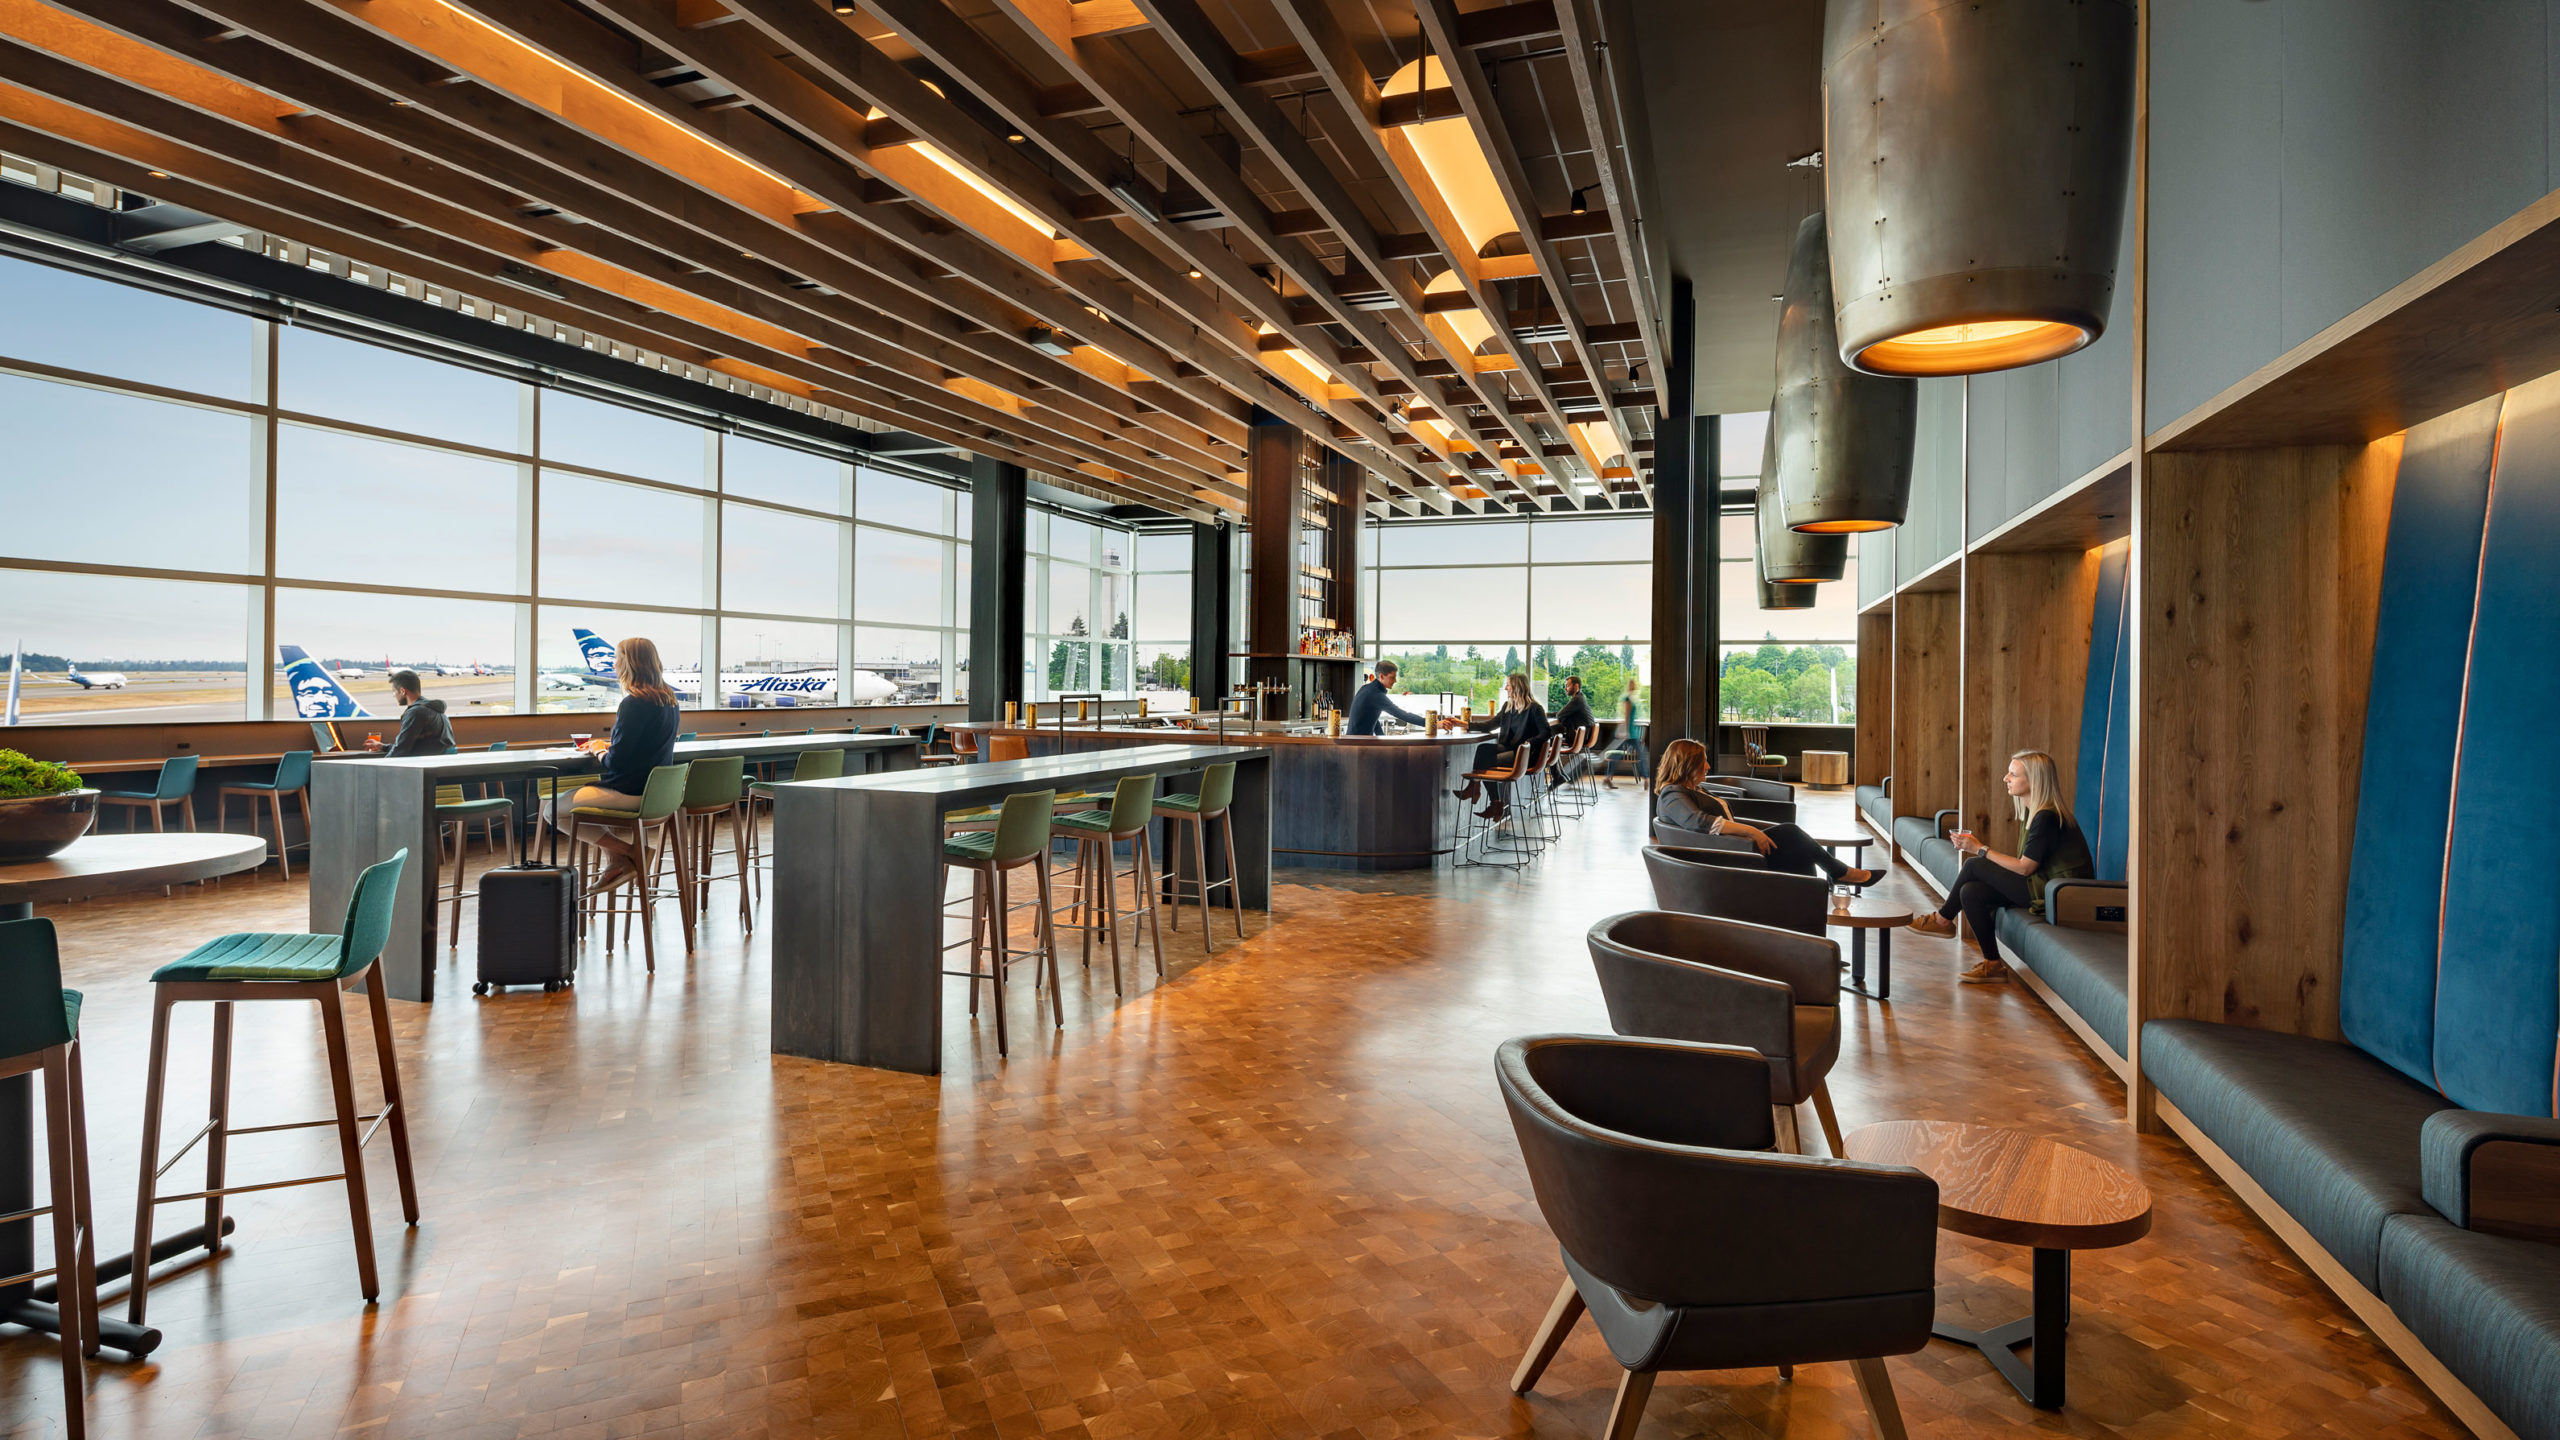 Alaska Airlines Flagship Lounge by GRAHAM BABA ARCHITECTS, Seattle transport interiors